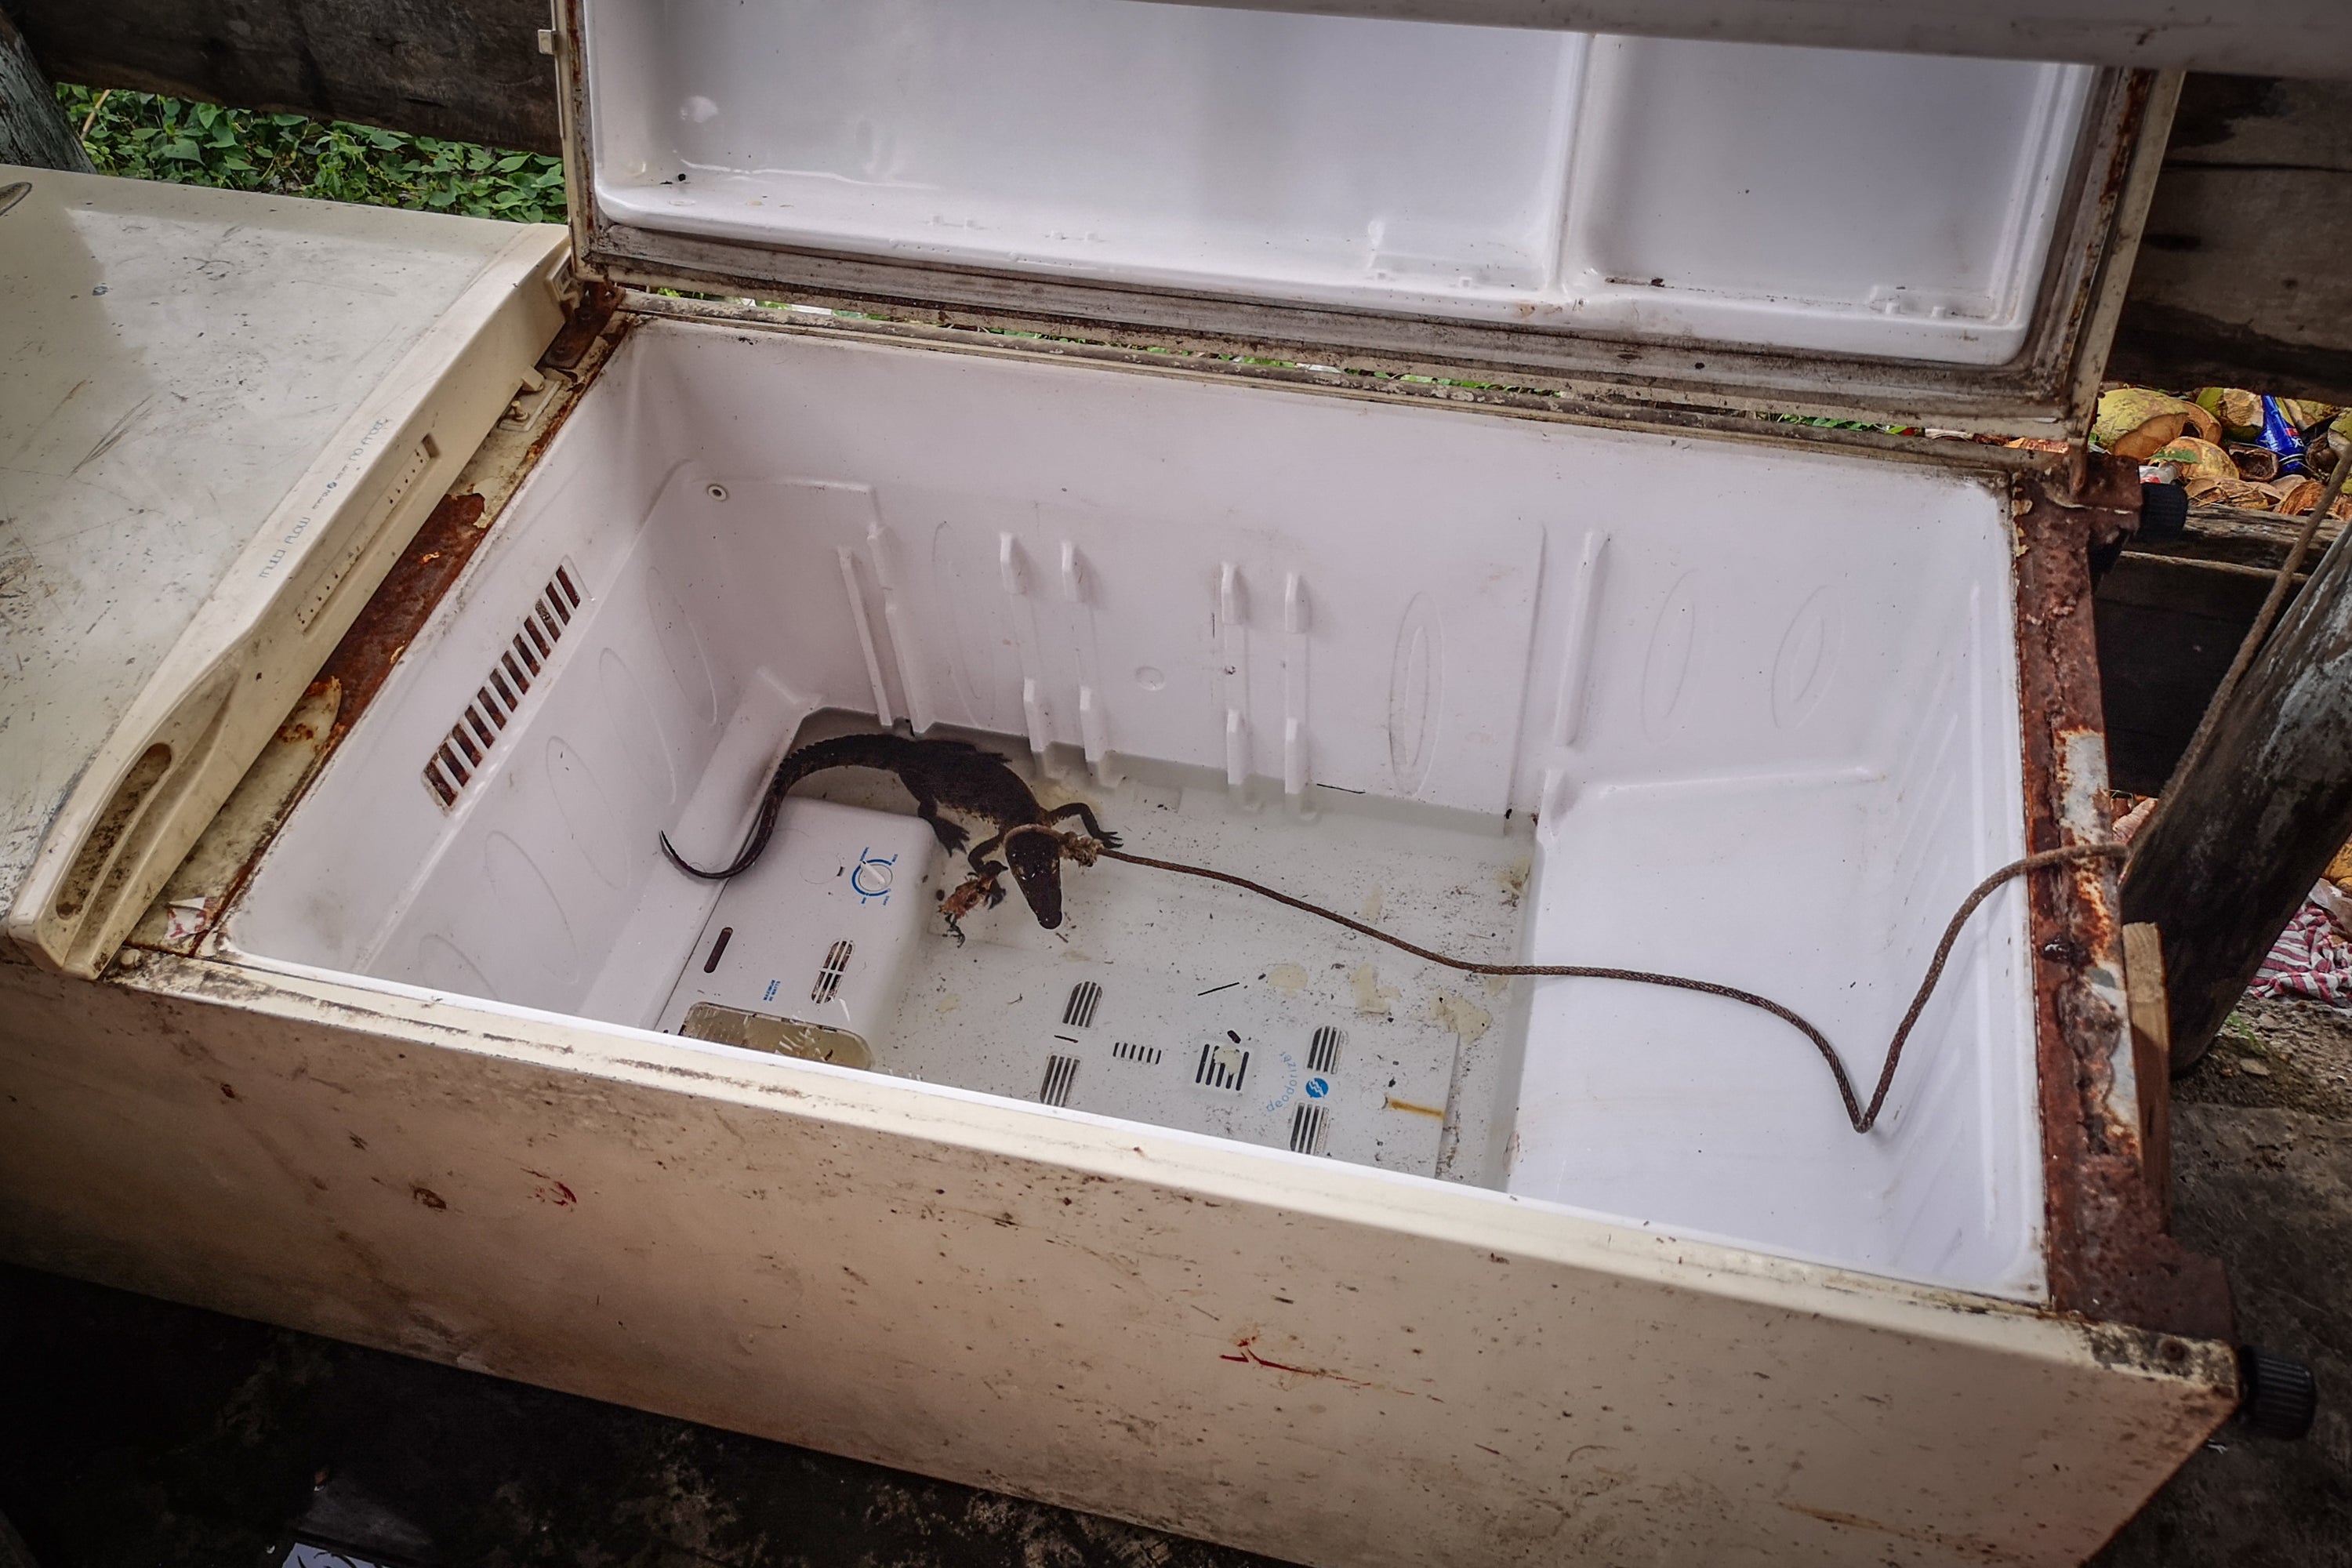 A young crocodile caught in the wild is kept tethered in an old refrigerator at a roadside restaurant in Mexico